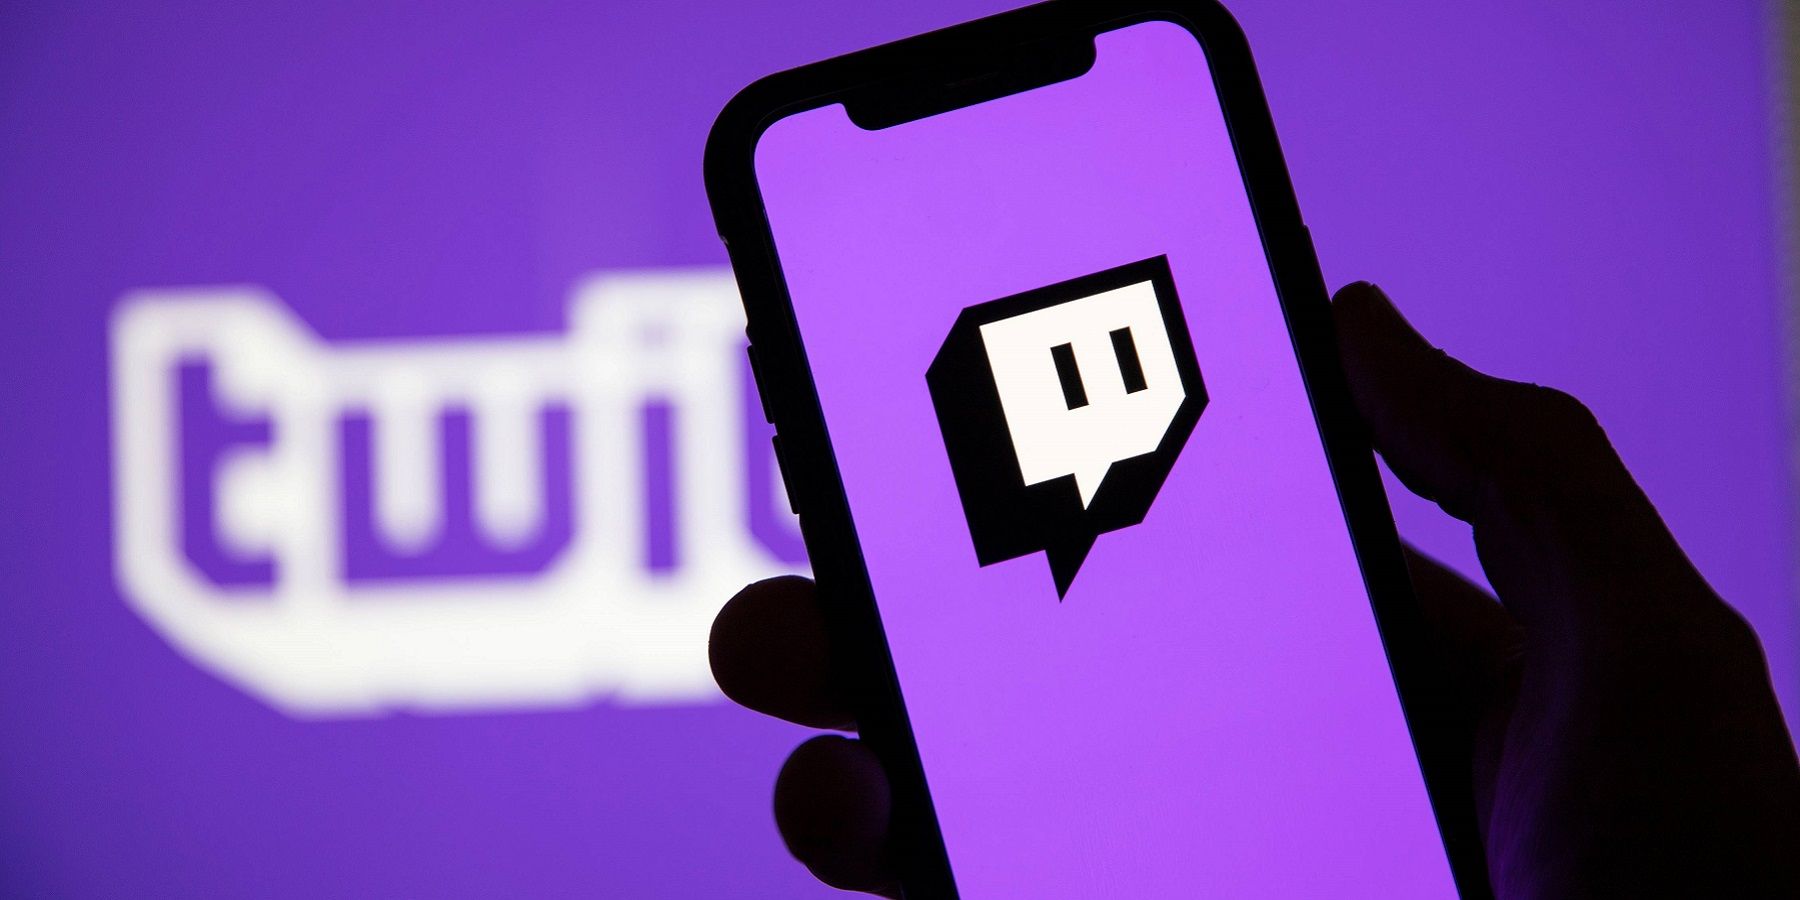 Twitch Announces New Analytics Features for
Streamers